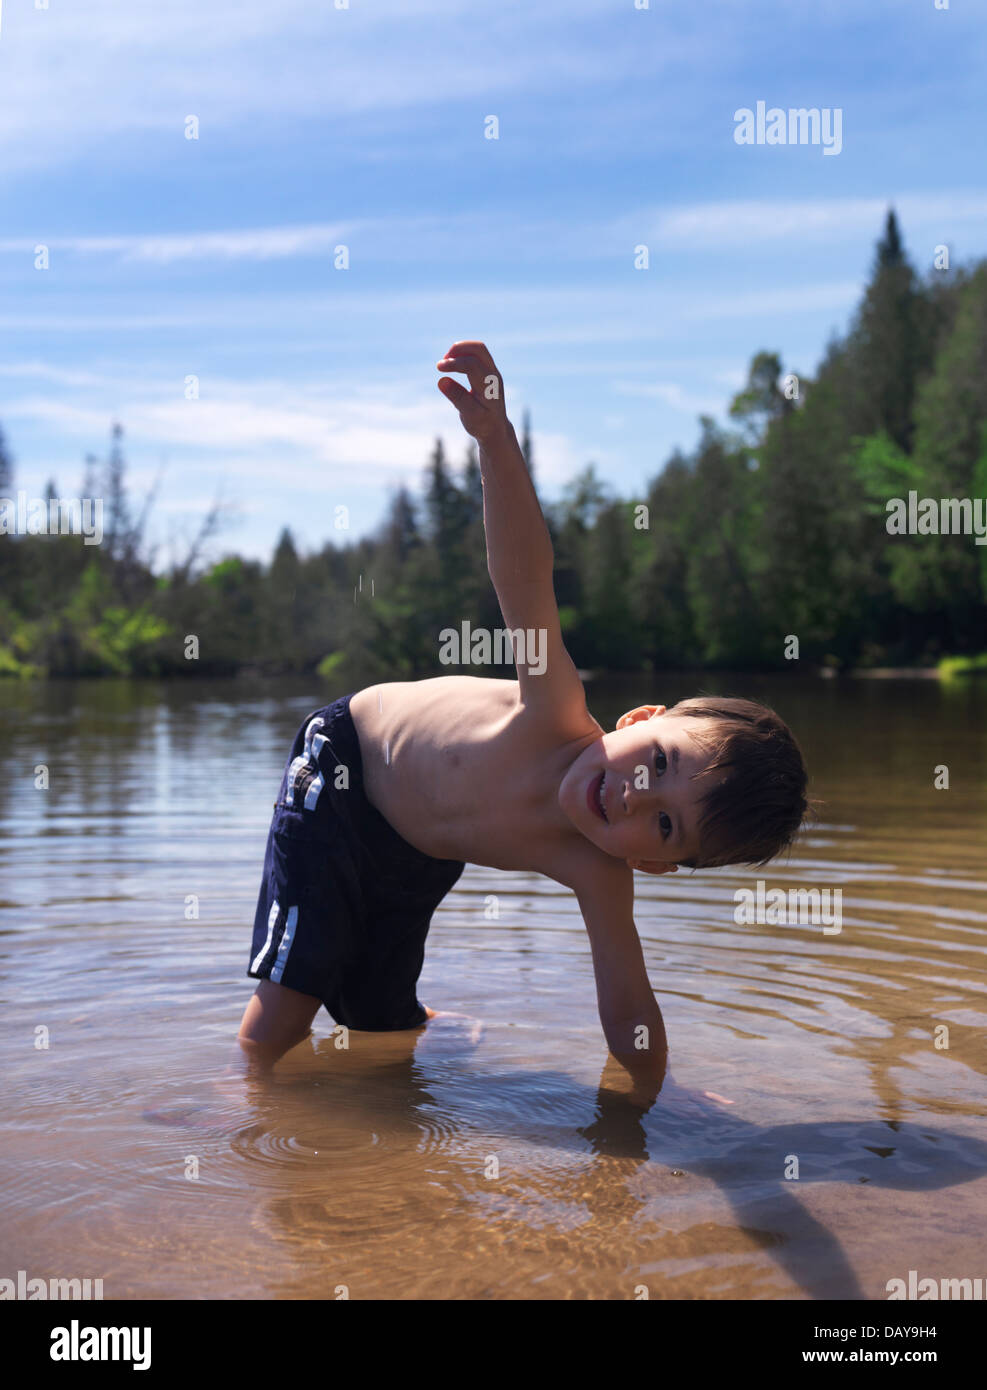 Portrait of a happy smiling child, 3 year old boy, playing in lake water in the nature. Ontario, Canada. Stock Photo